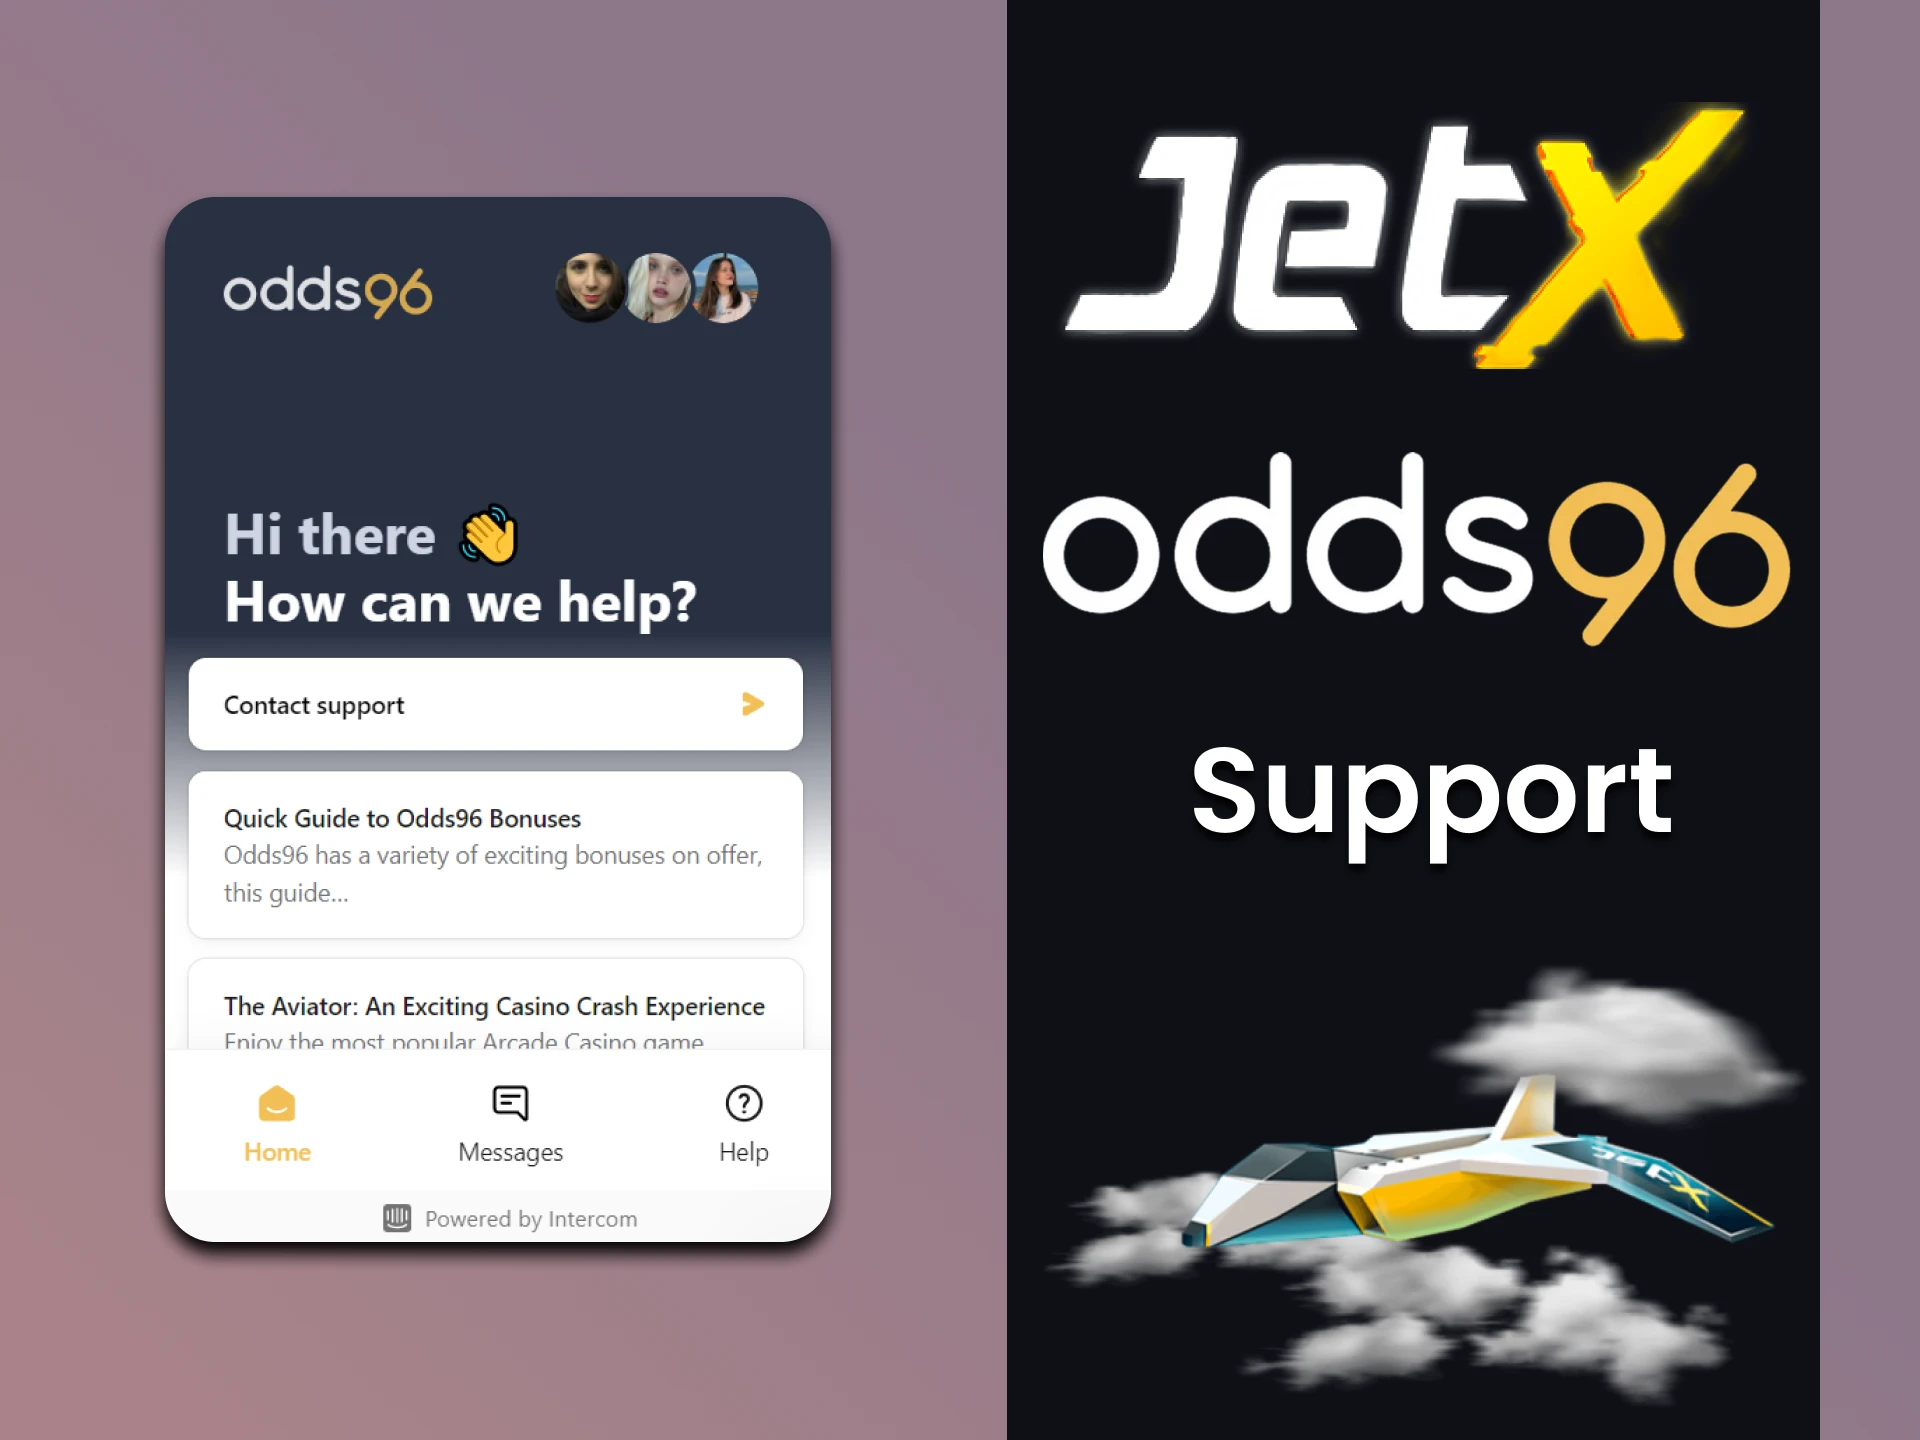 You can always contact the Odds96 team for the JetX game.